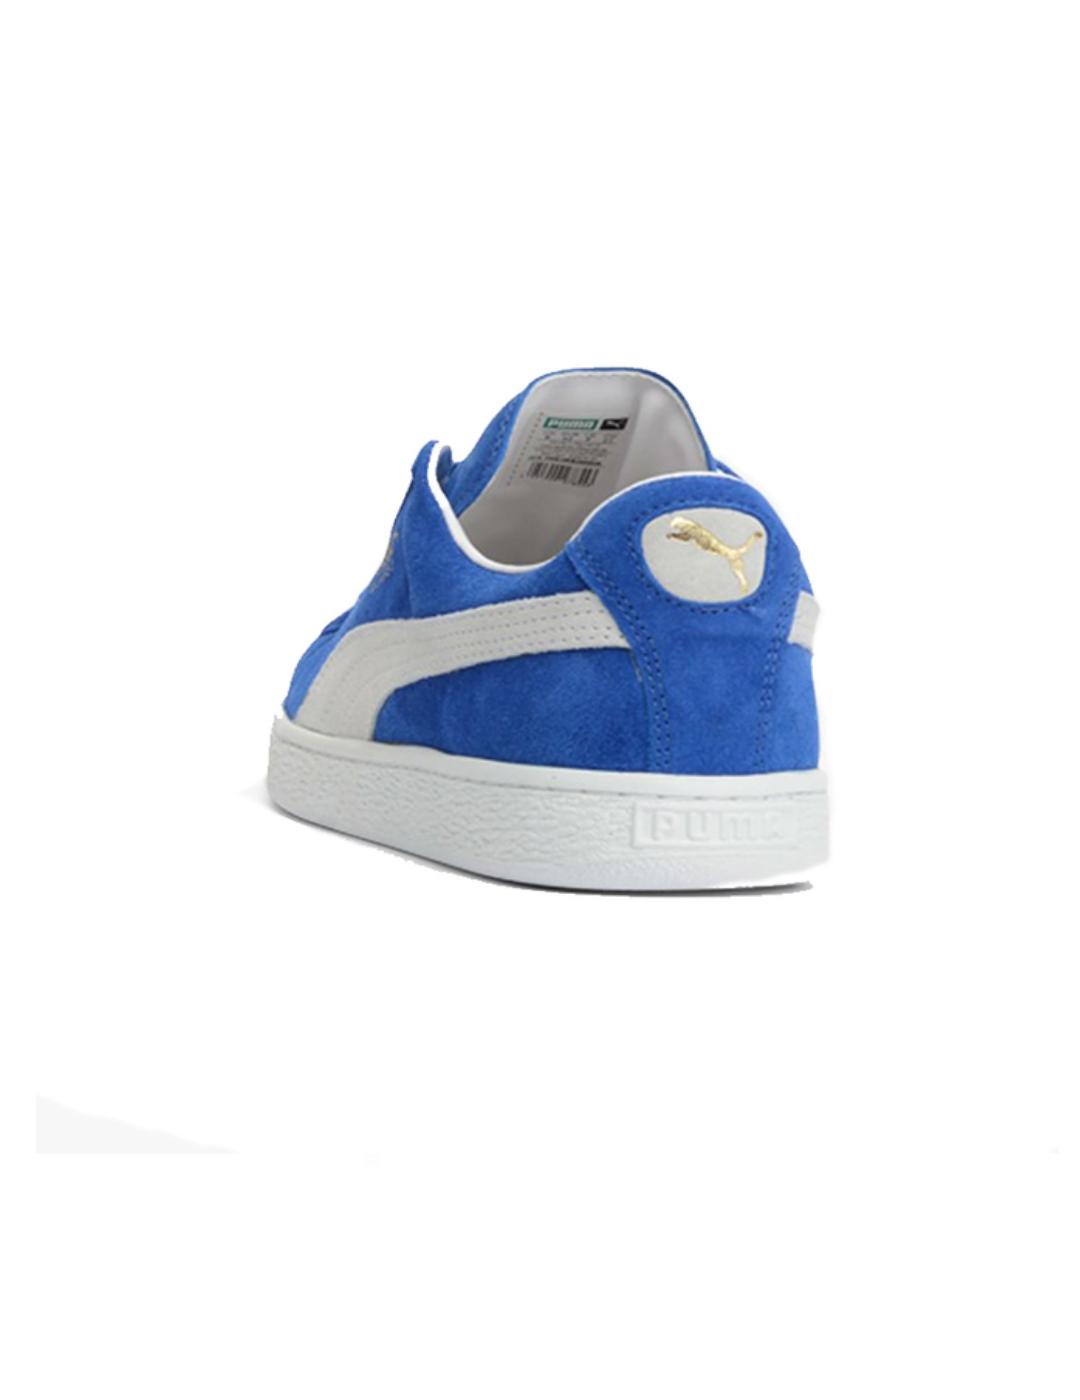 SUEDE CLASSIC BLUE WHITE-S